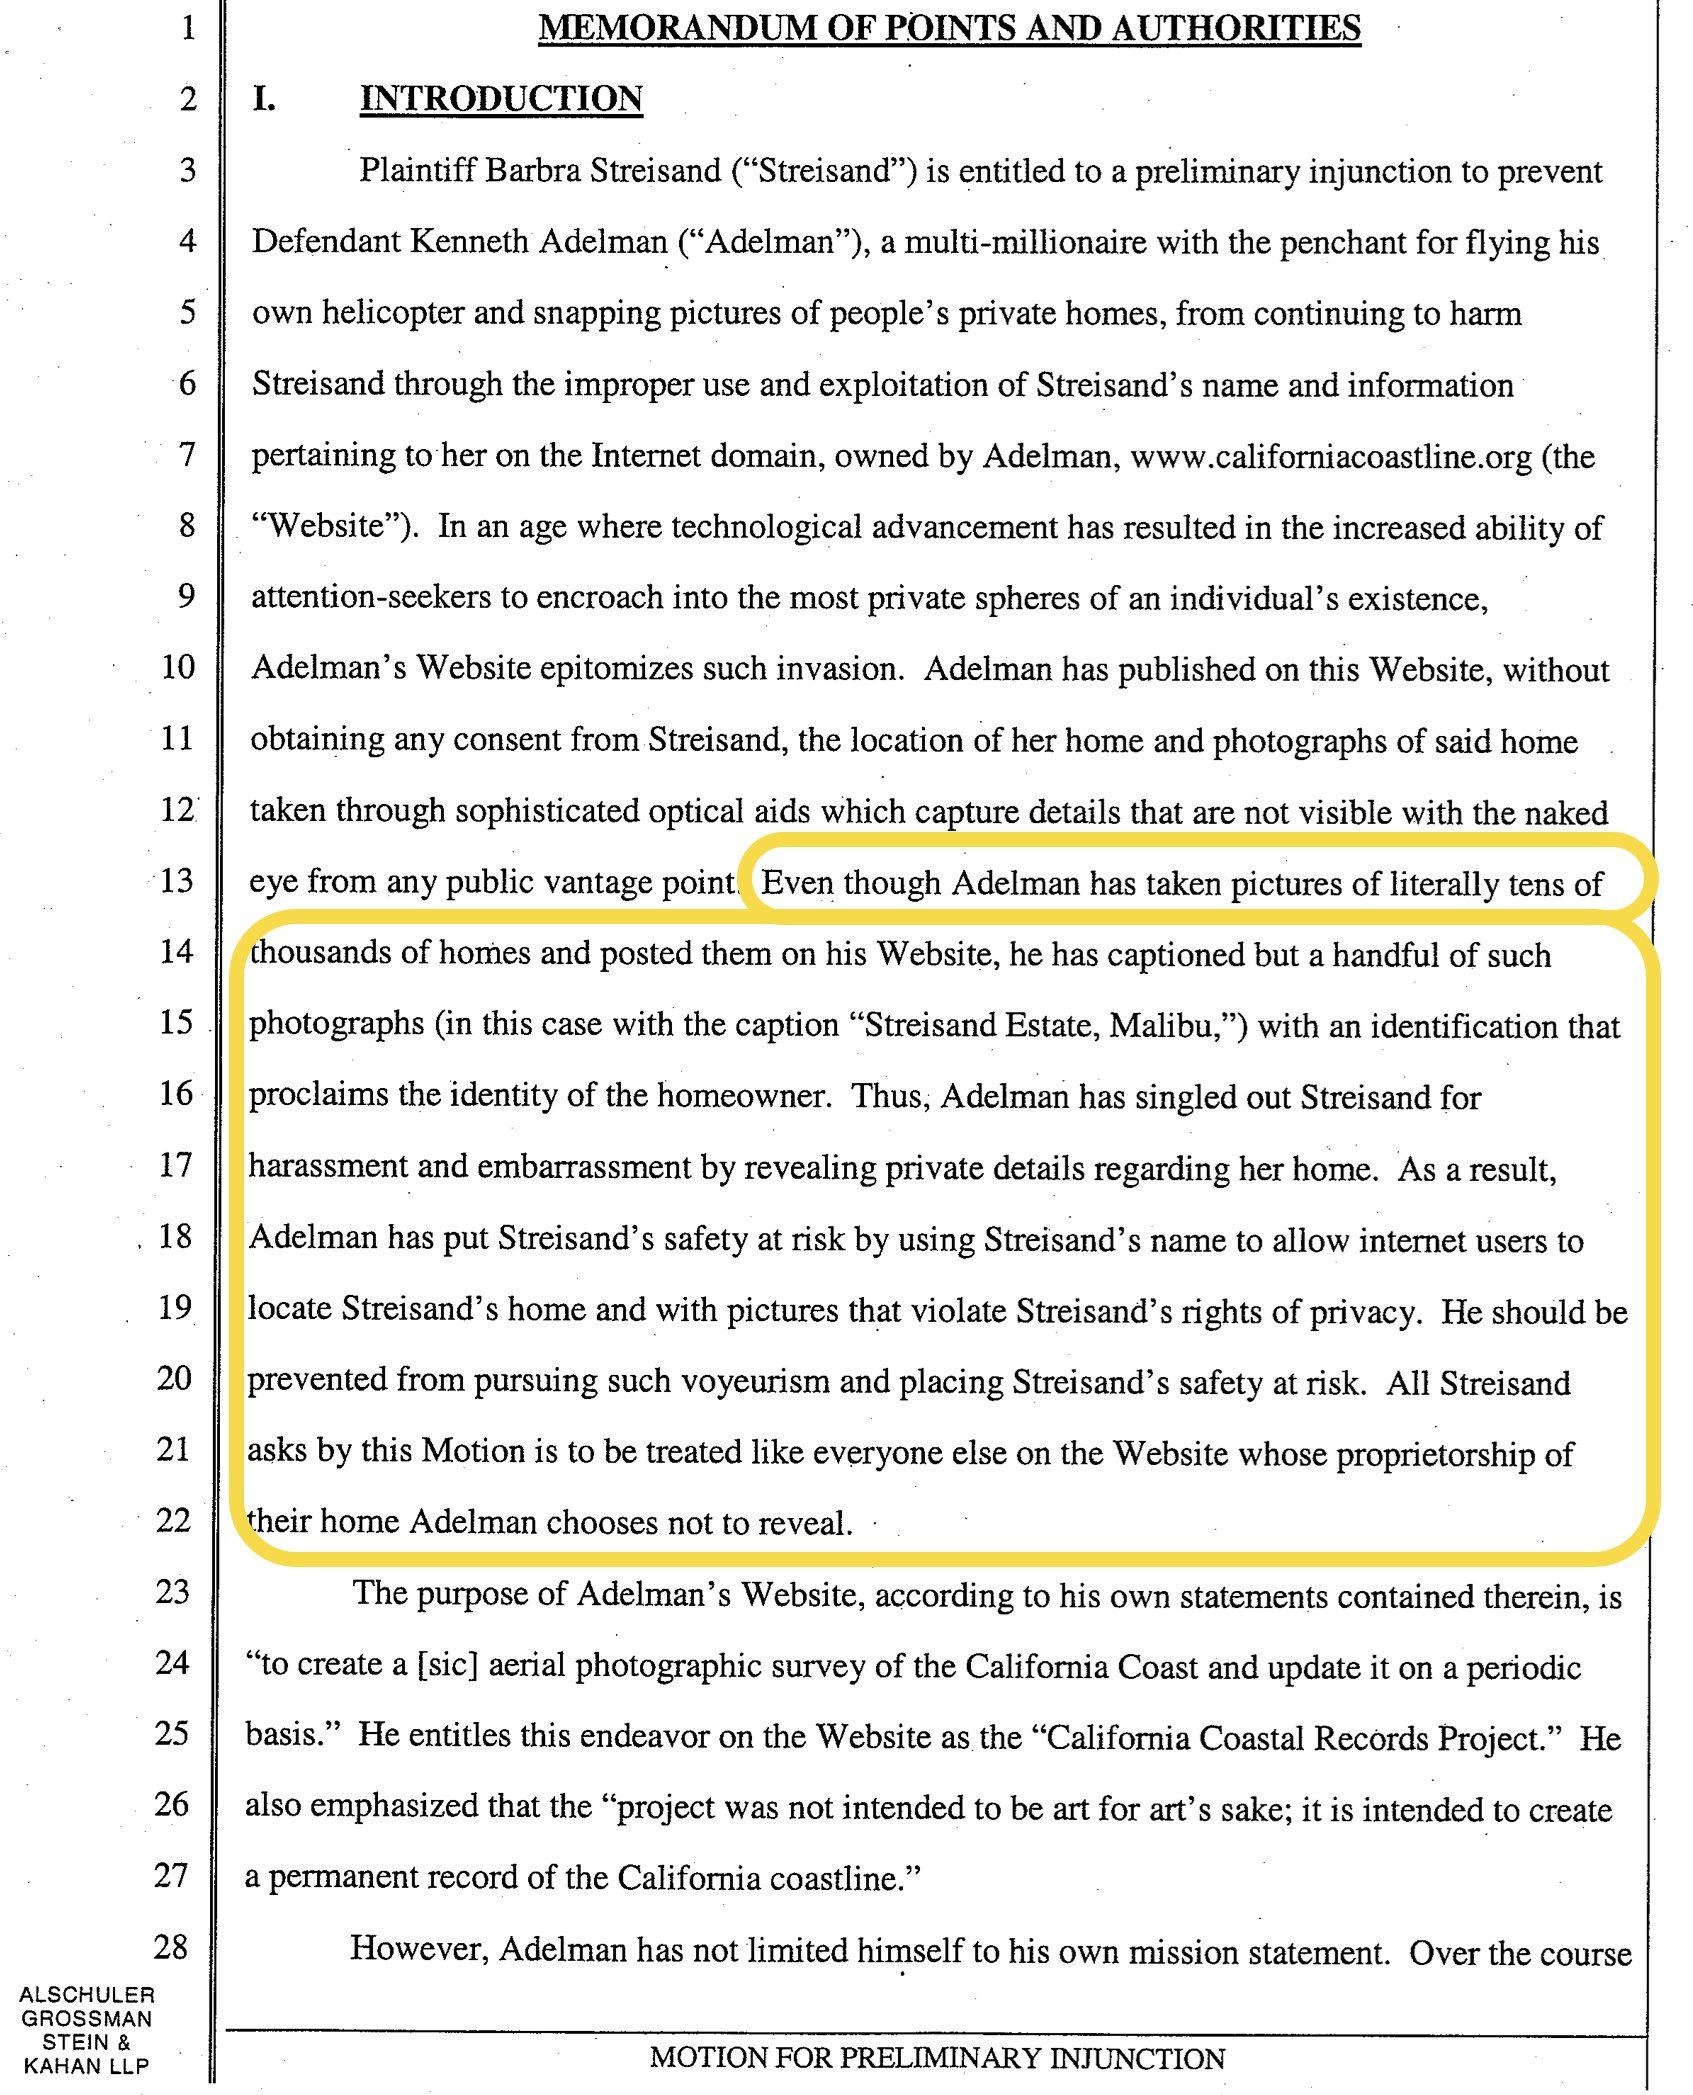 Image from 2003 plaintiff's motion for preliminary injunction with Streisand's quotes highlighted.